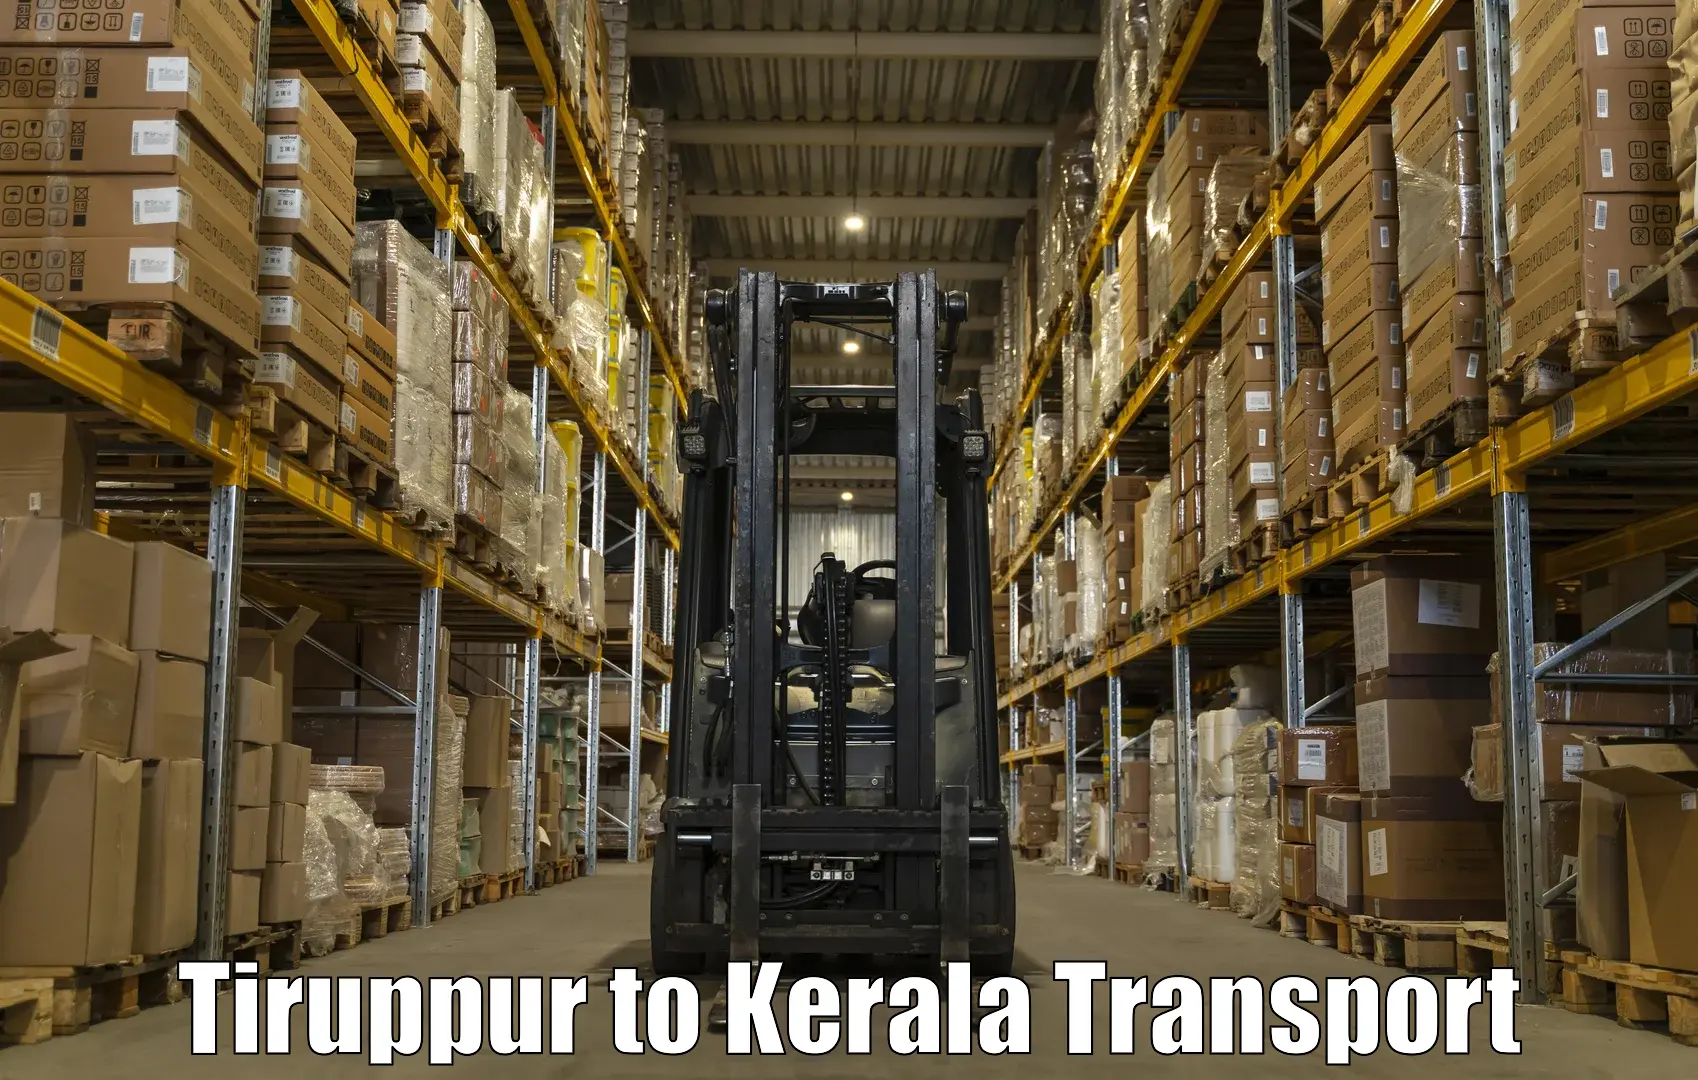 Goods delivery service Tiruppur to Perinthalmanna